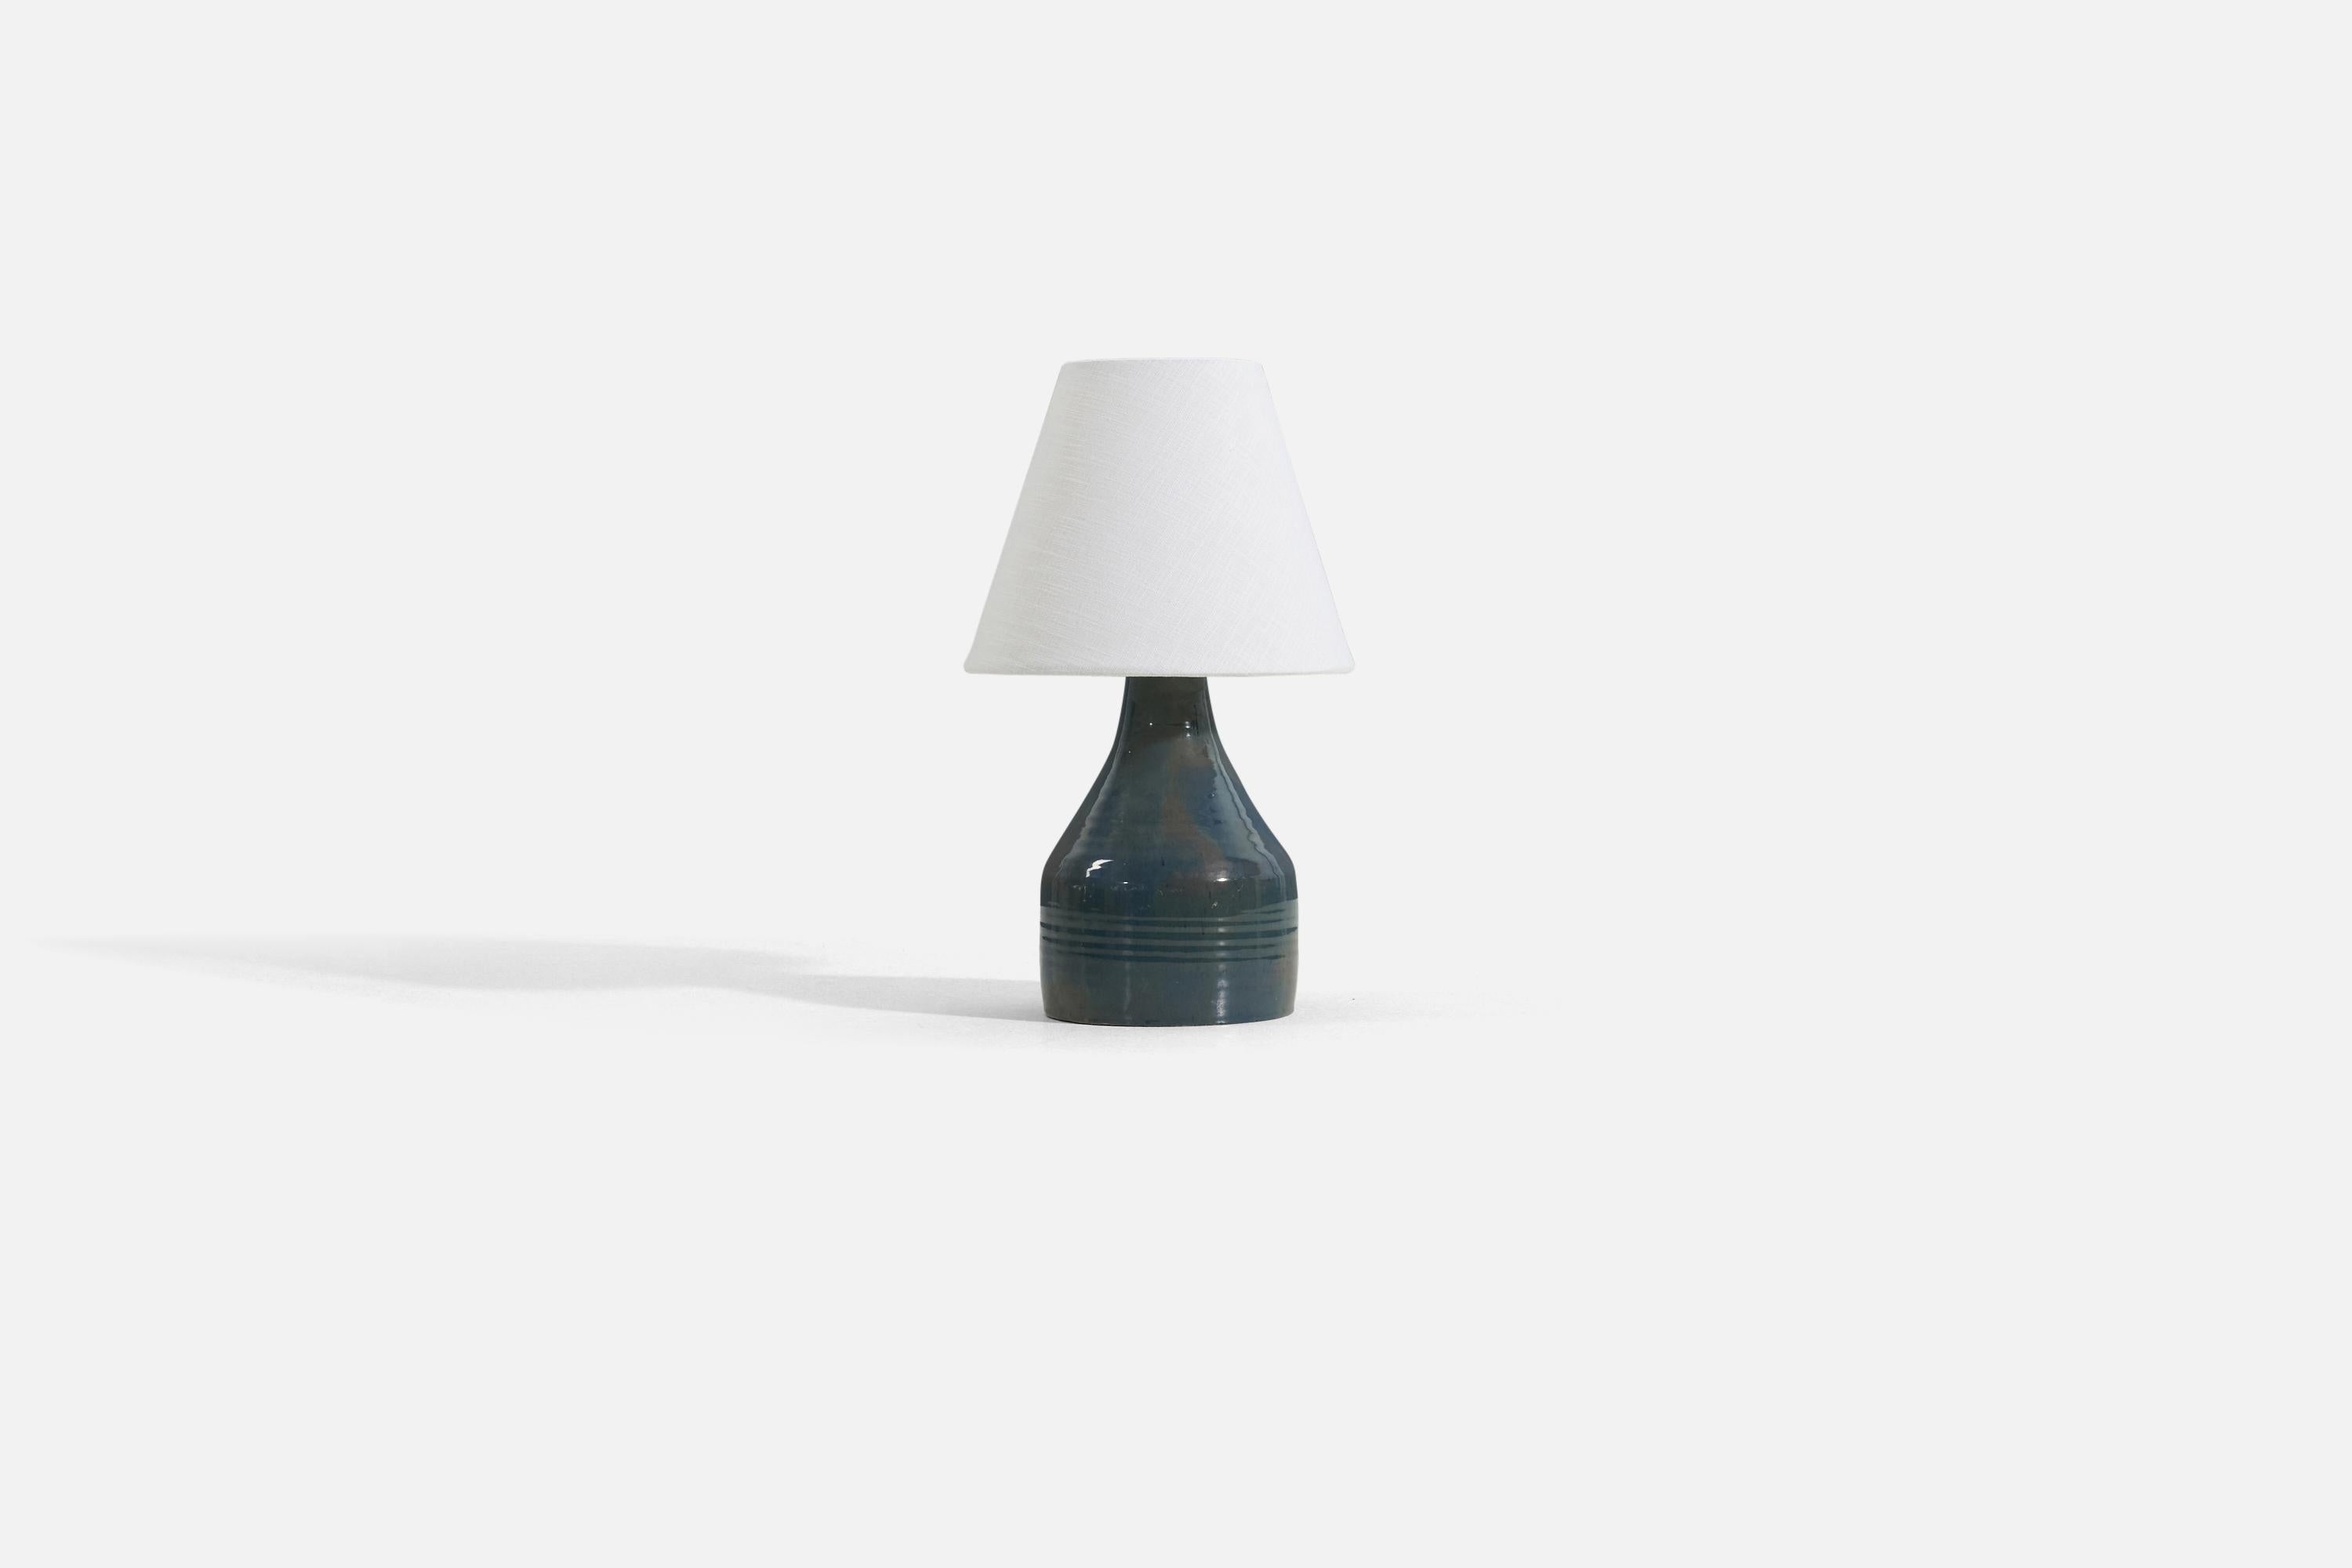 A blue-glazed stoneware table lamp, designed and produced in Sweden, c. 1960s.